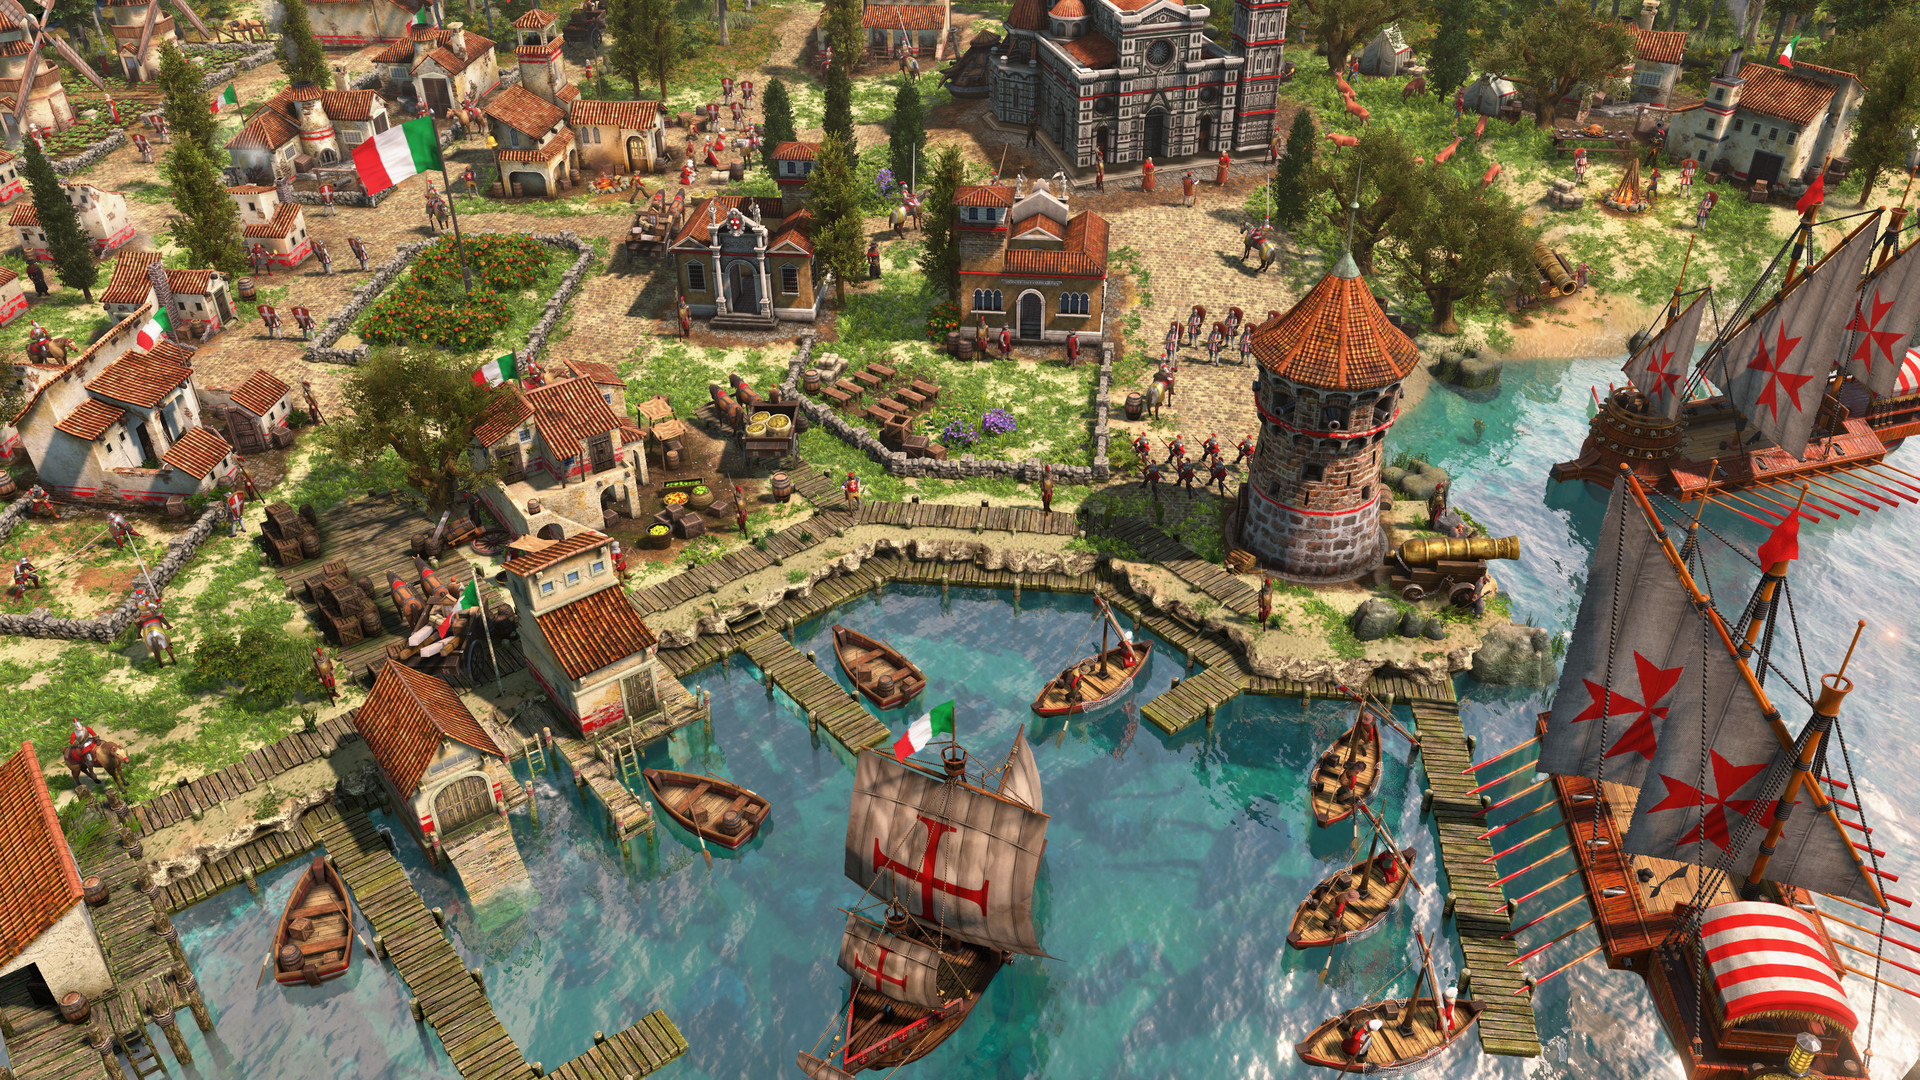 age of empires iii definitive edition knights of the mediterranean download free